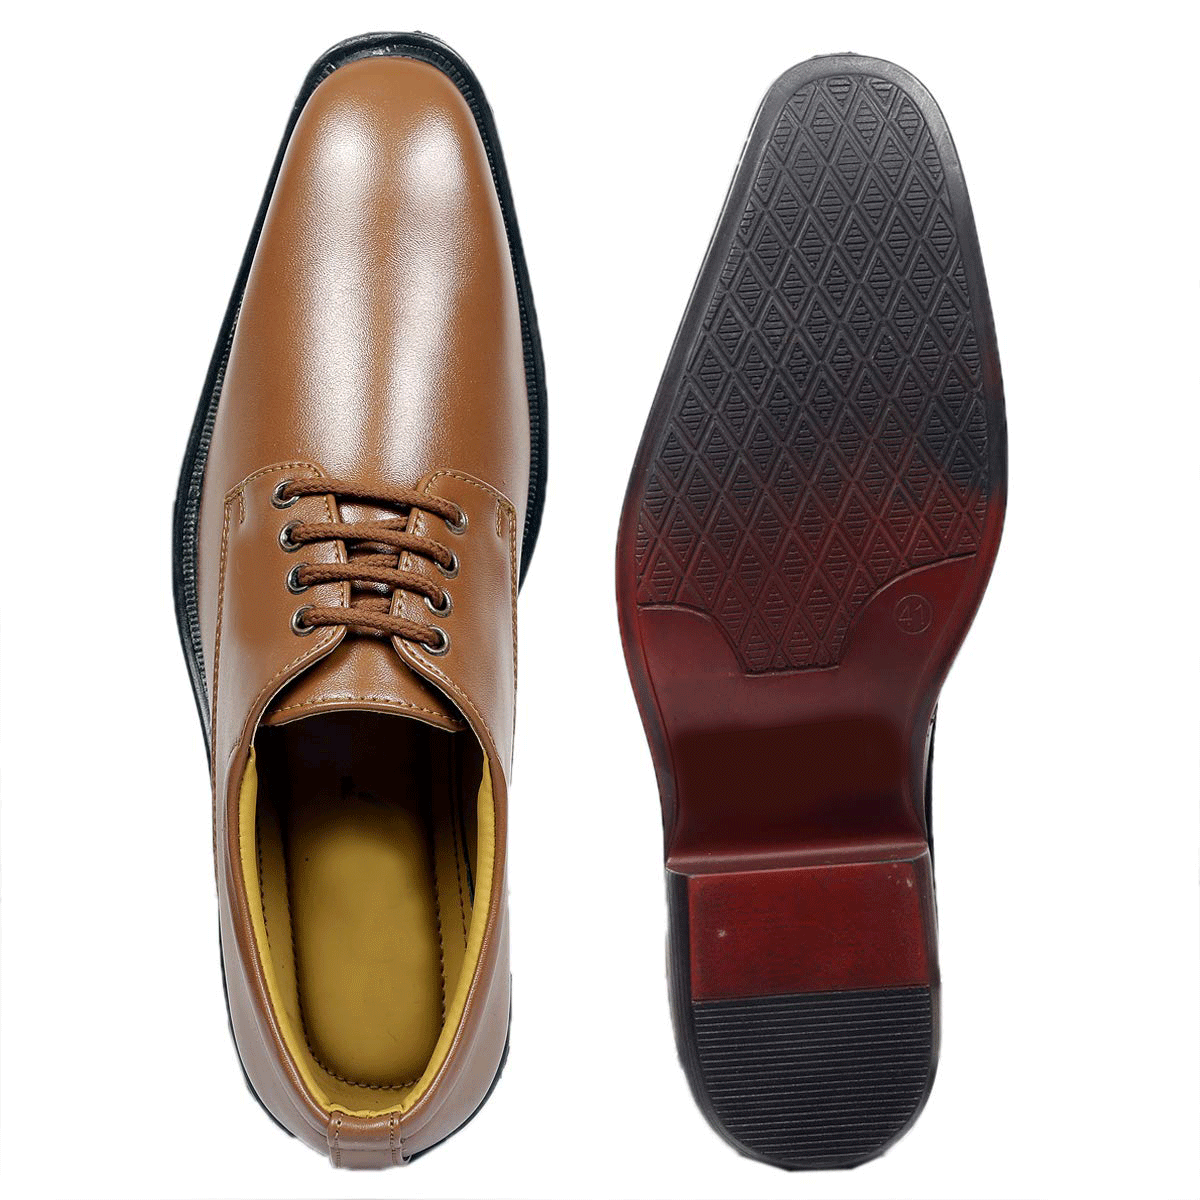 Classic Pattern Height Increasing Tan Casual, Formal Office Wear Derby Shoes-Unique and Classy